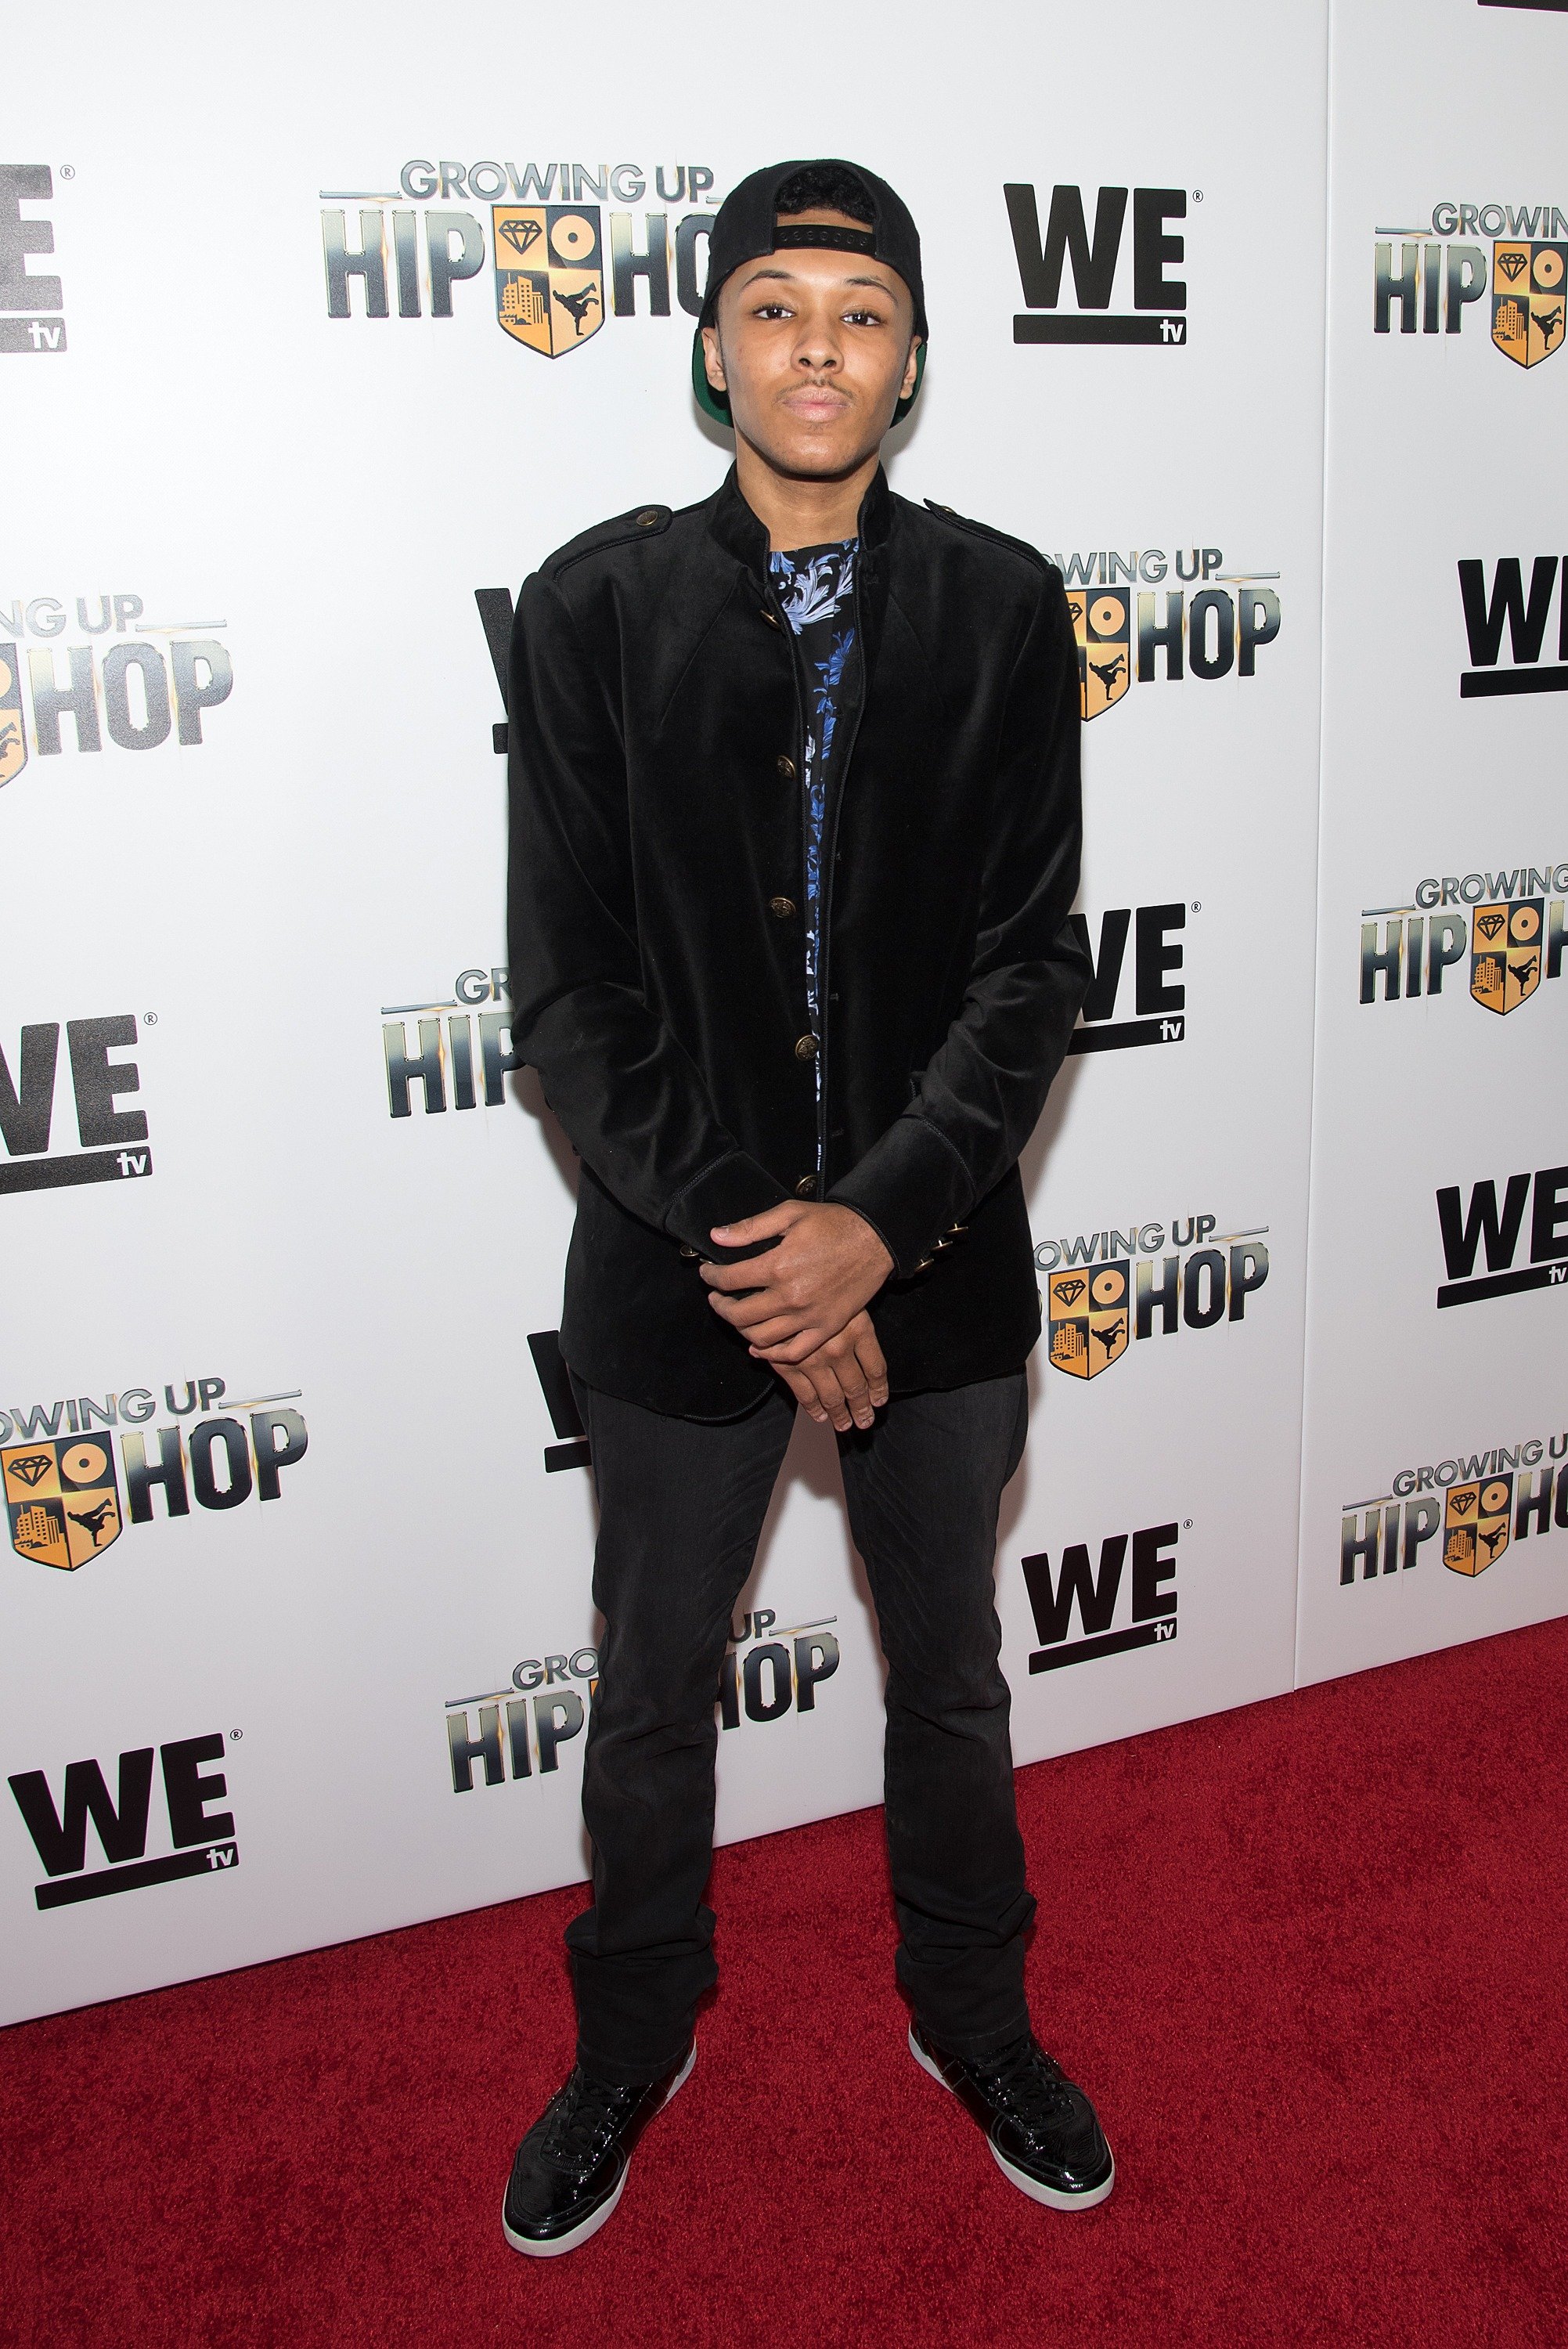 Russell Simmons II at the premiere party of "Growing Up Hip Hop" on December 10, 2015, in New York | Source: Getty Images